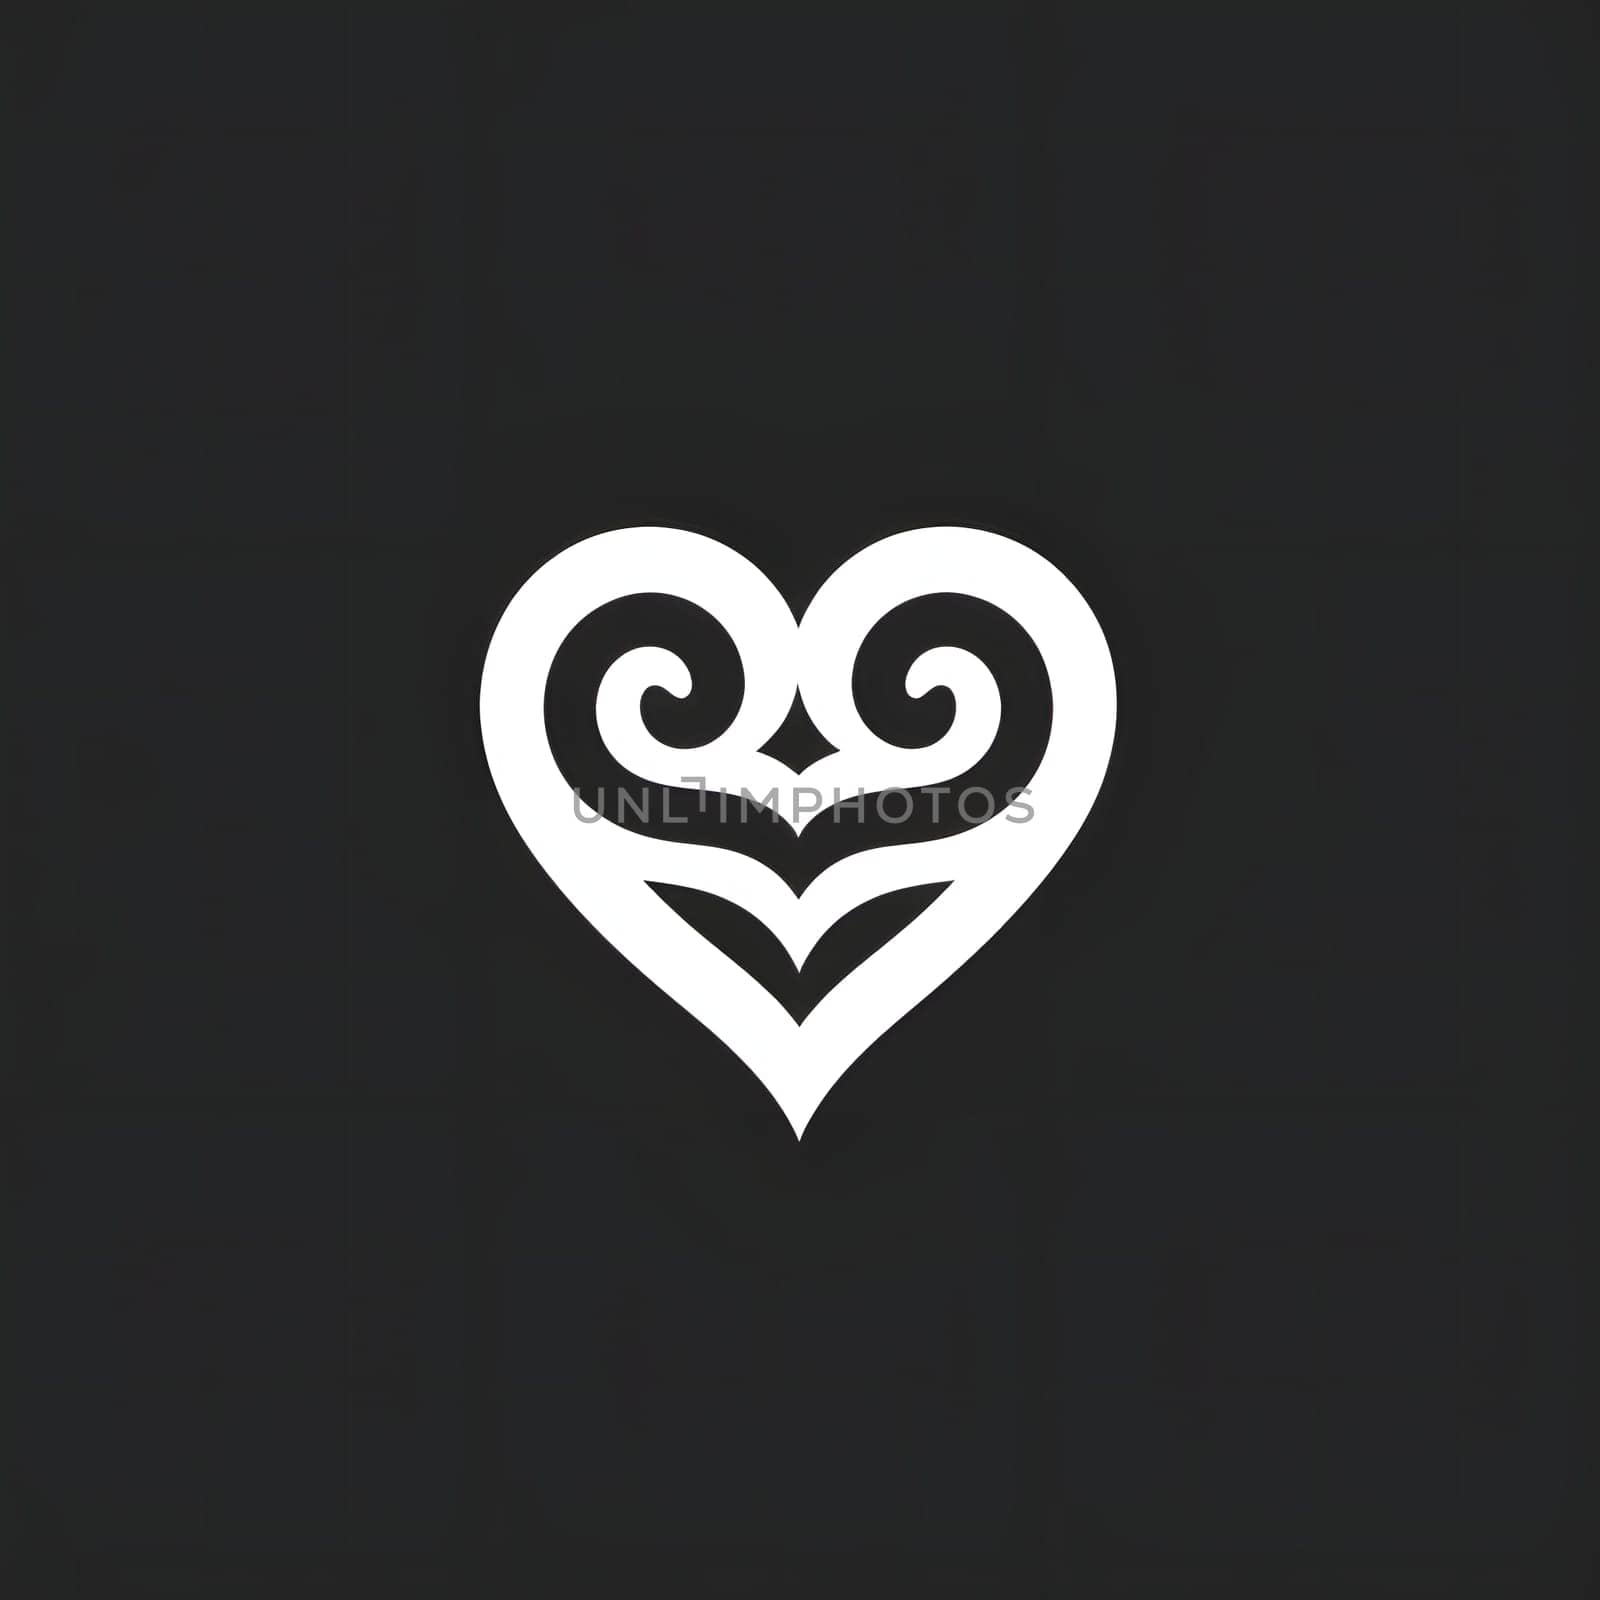 Concept logos heart with two swirls dark background. Heart as a symbol of affection and love. The time of falling in love and love.